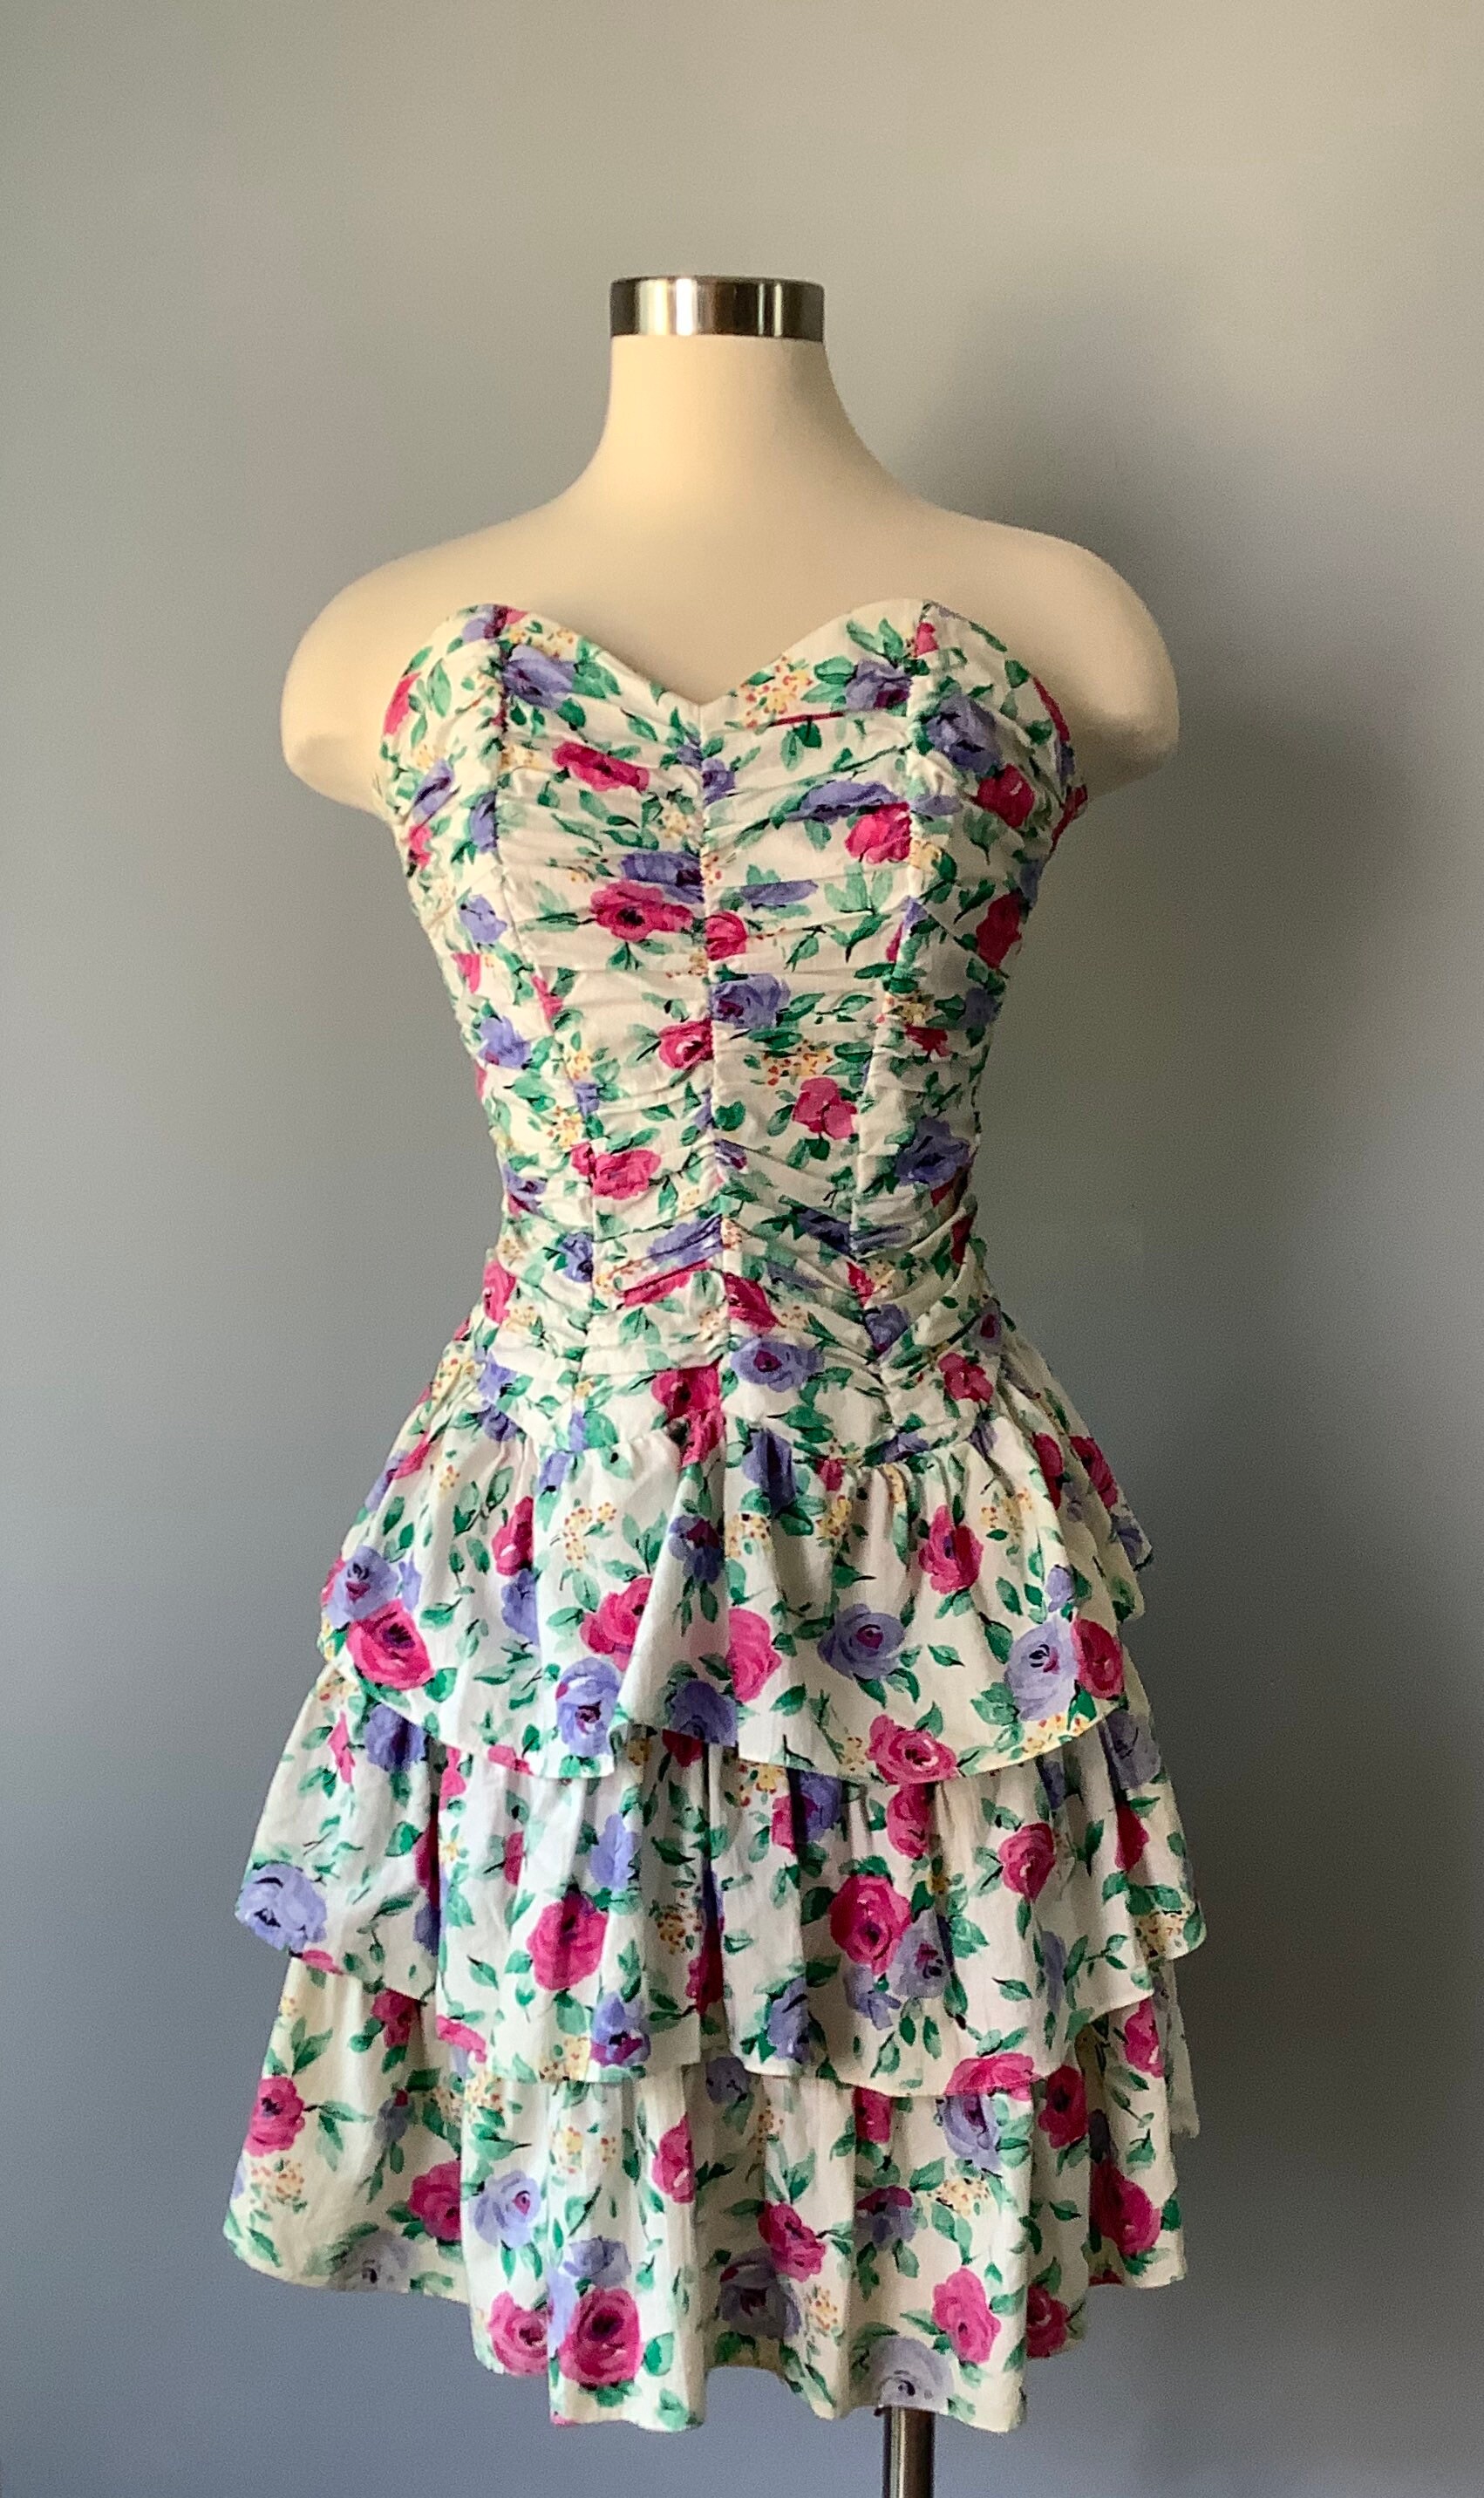 1980s Vintage Strapless Floral Cotton Tiered Ruffle Dress | Etsy